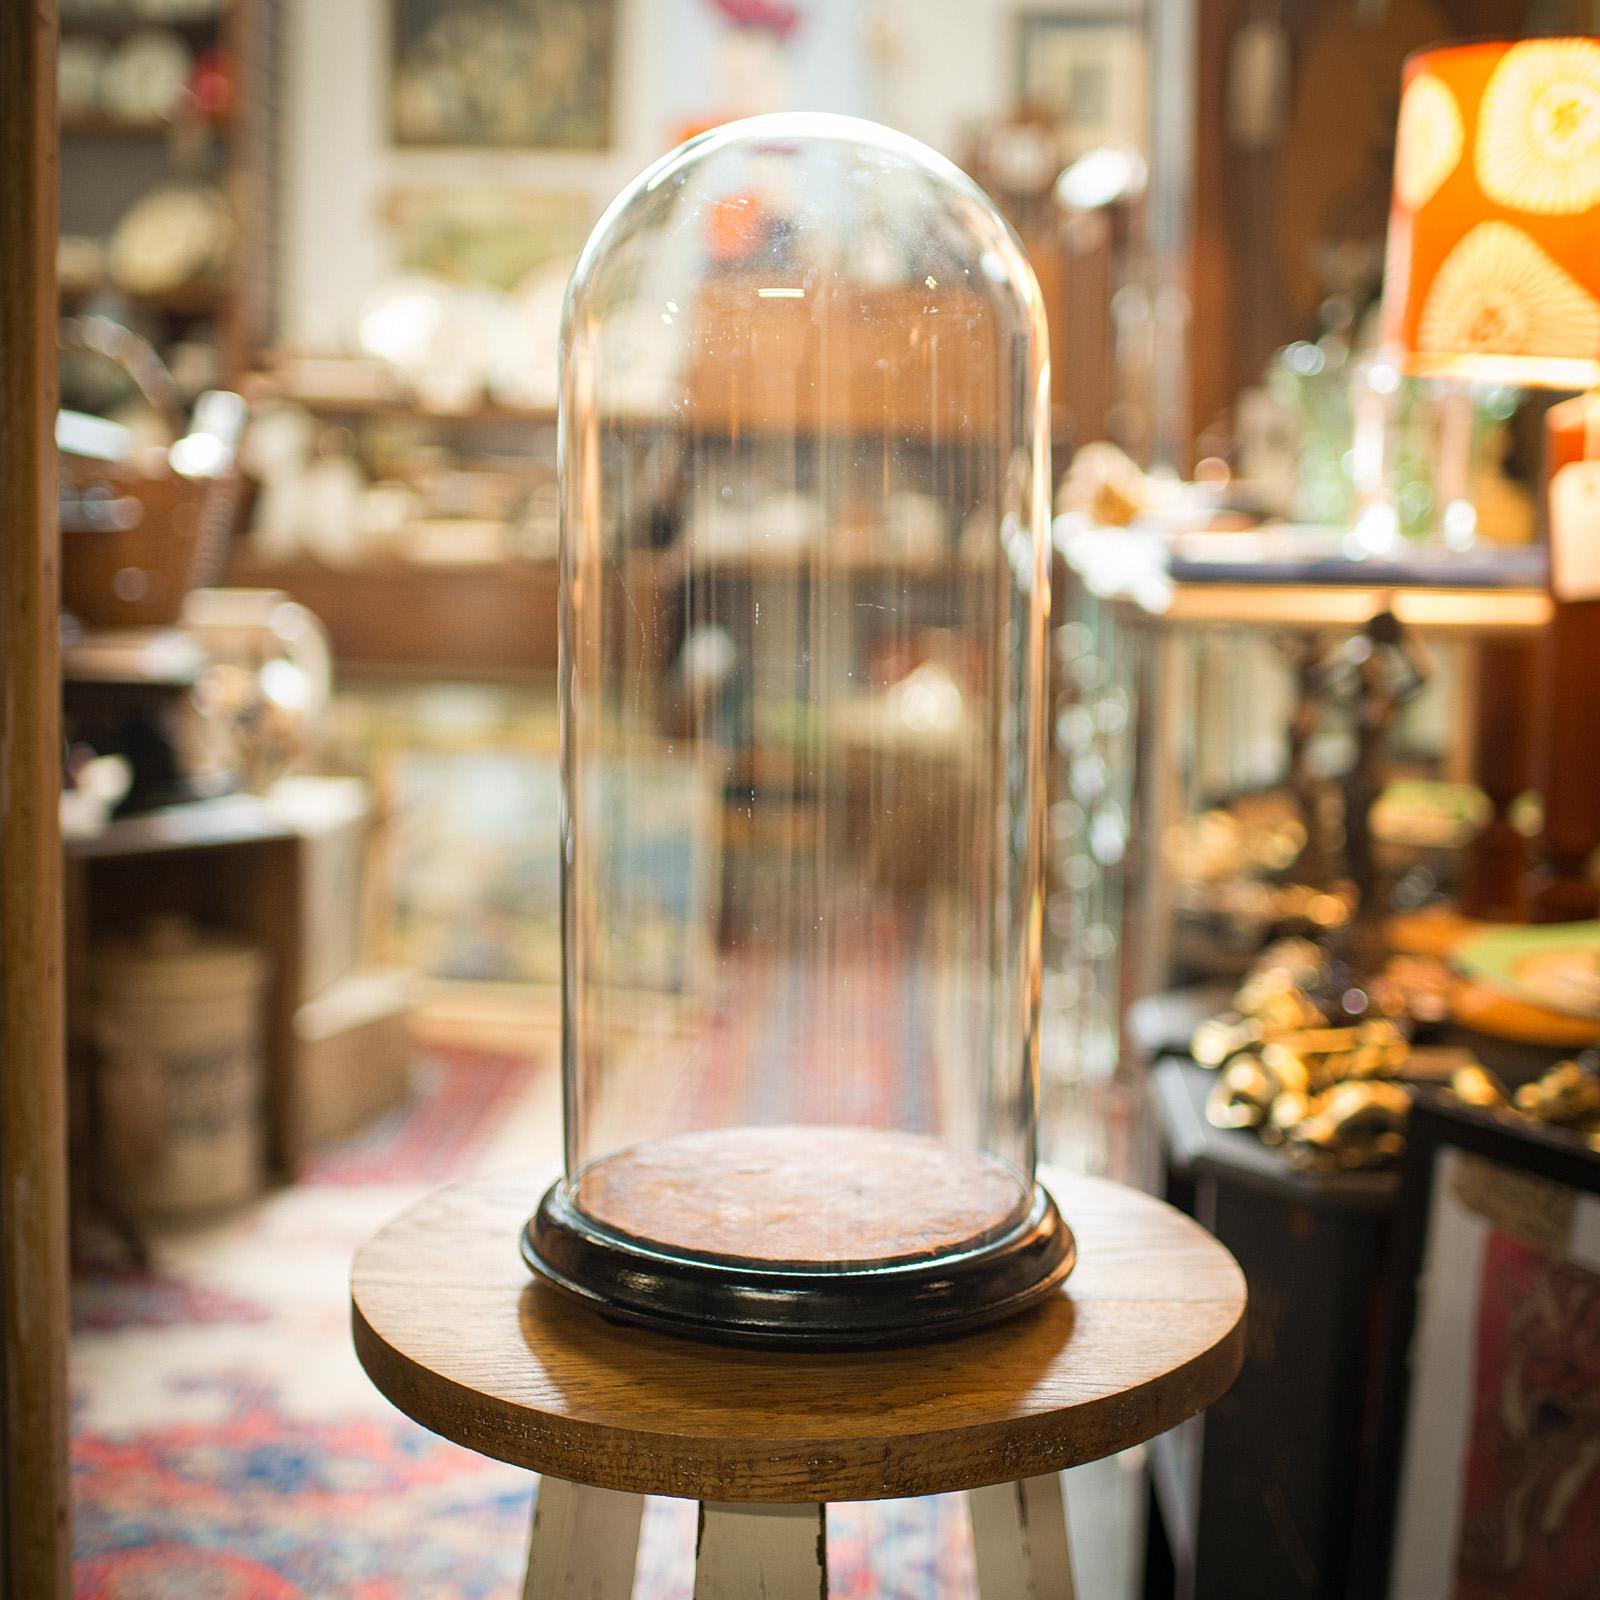 This is a tall antique specimen dome. An English, glass and leather taxidermy display case, dating to the Victorian period, circa 1880.

Well proportioned Victorian dome, ideal for displaying medium tall exhibits
Displays a desirable aged patina and